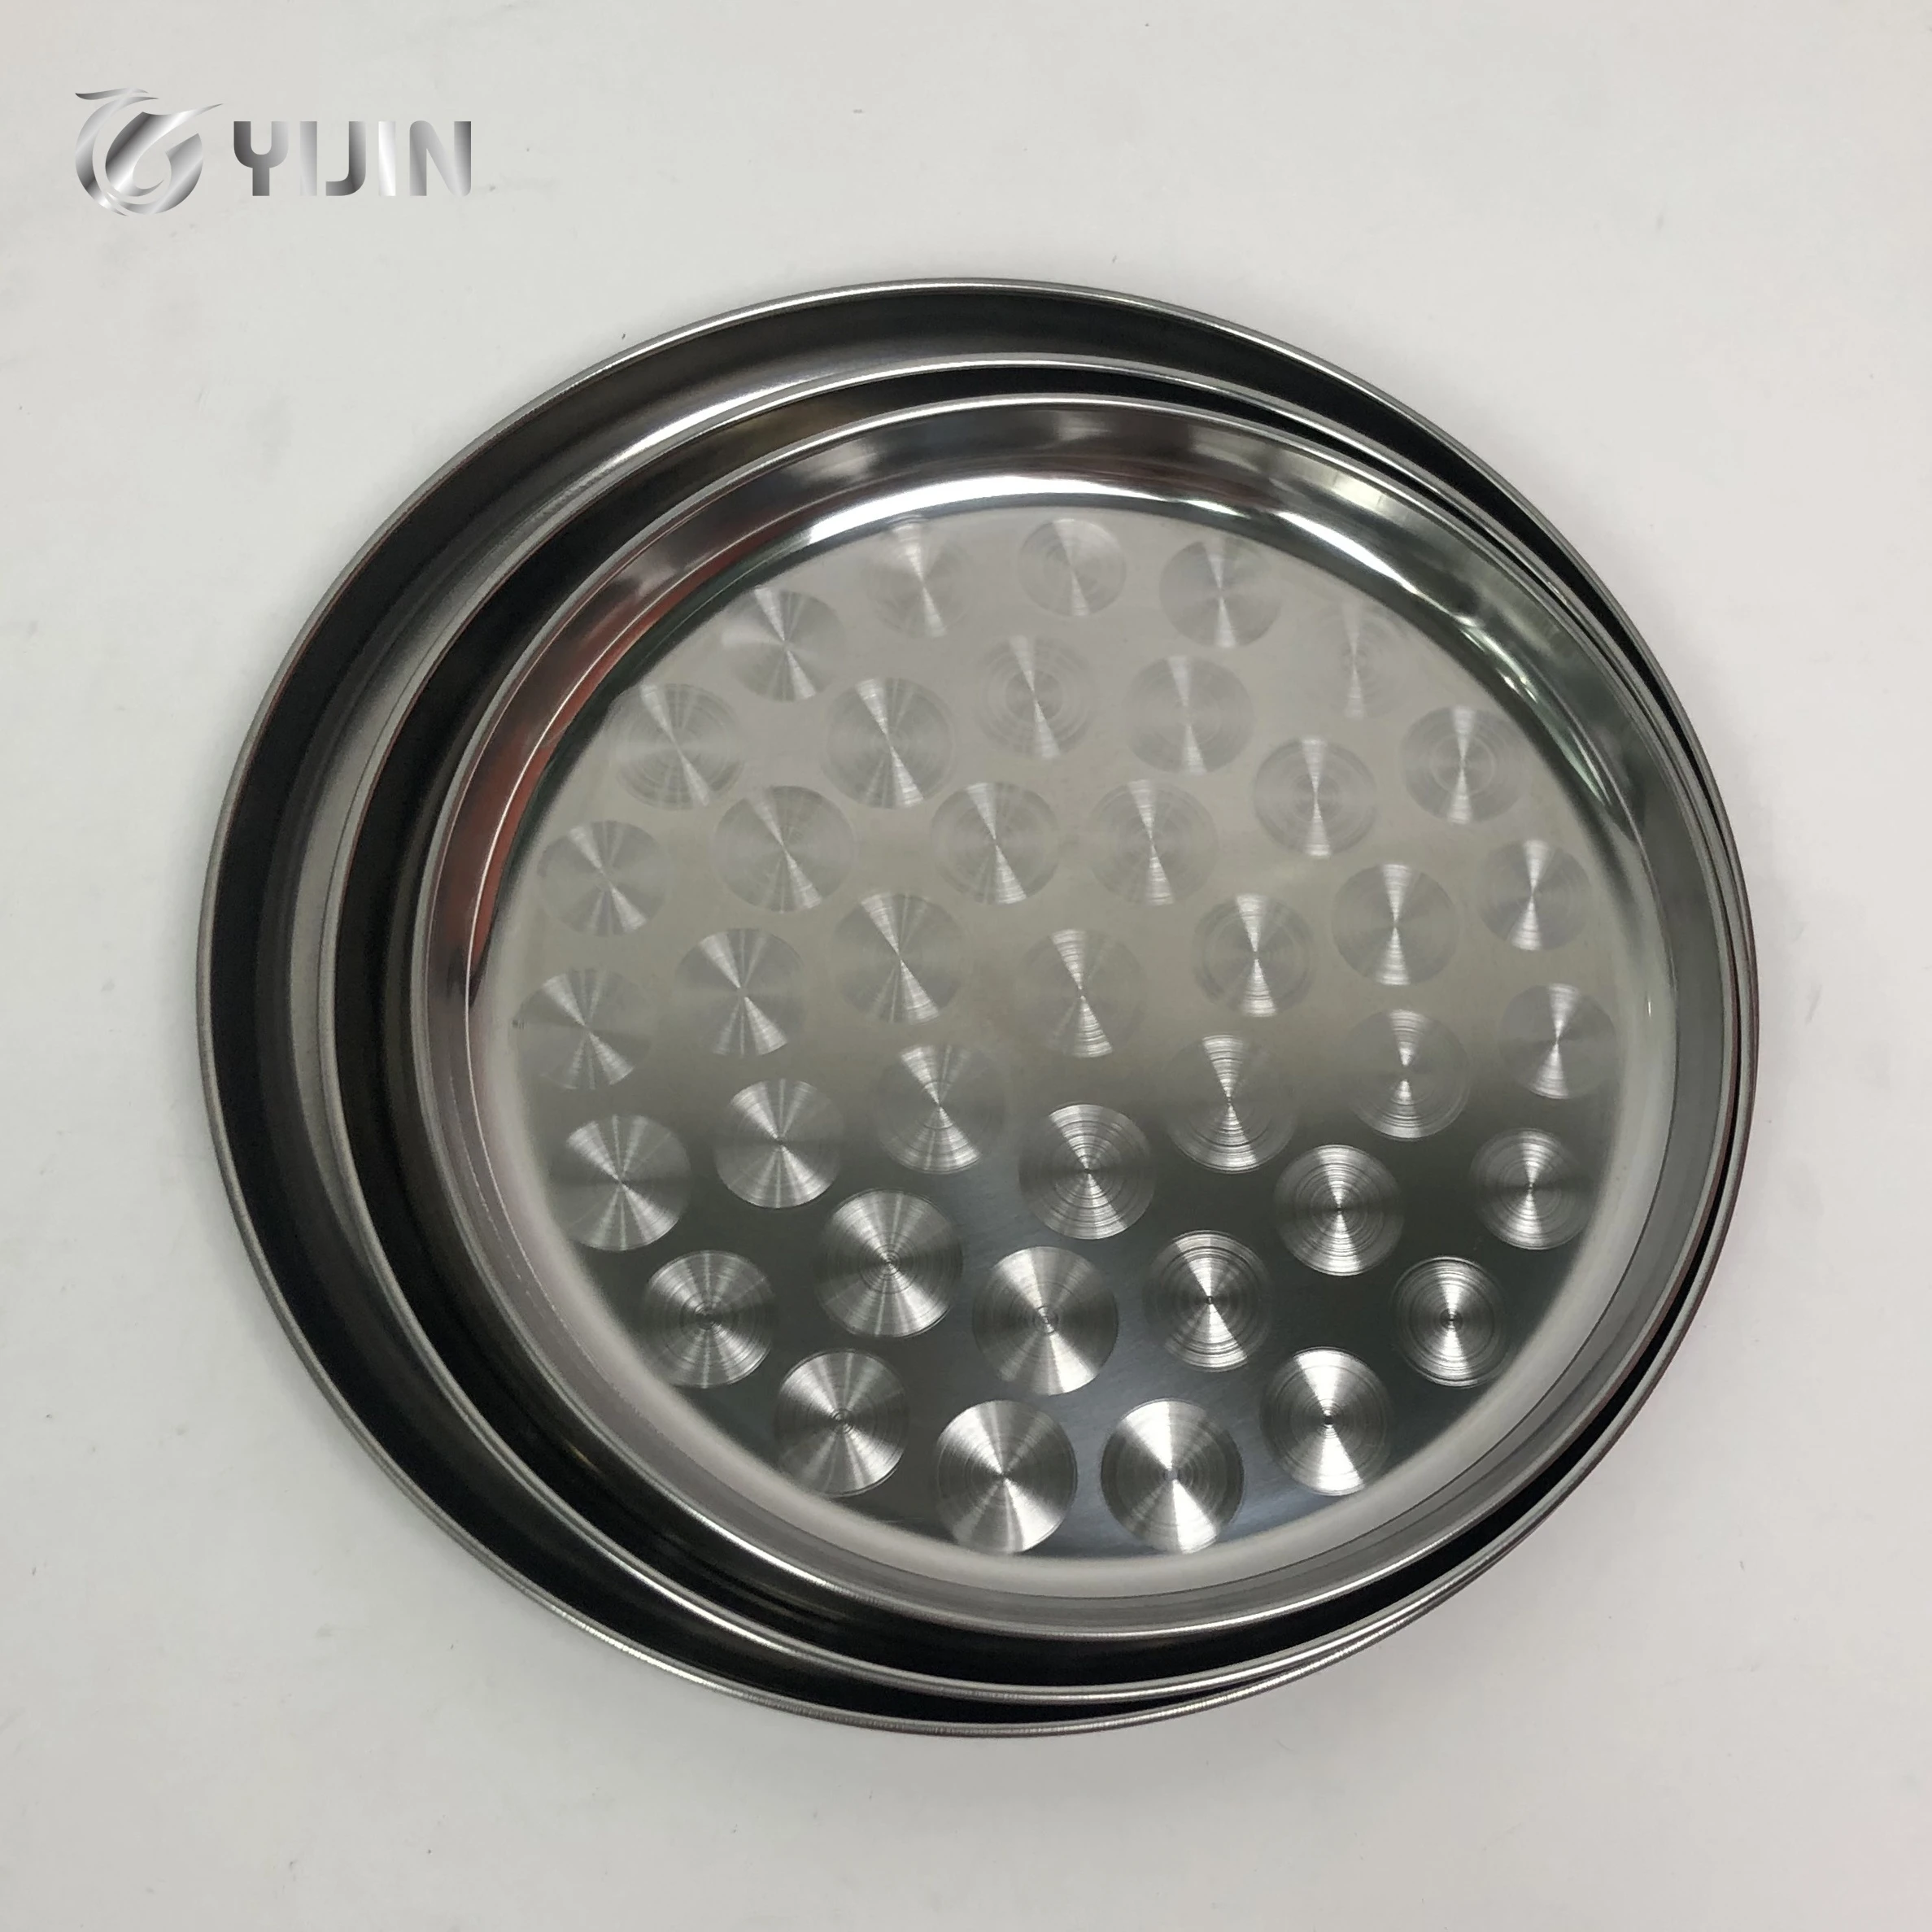 Factory wholesale silver dinner pate & dishes metal stainless steel food round serving tray set